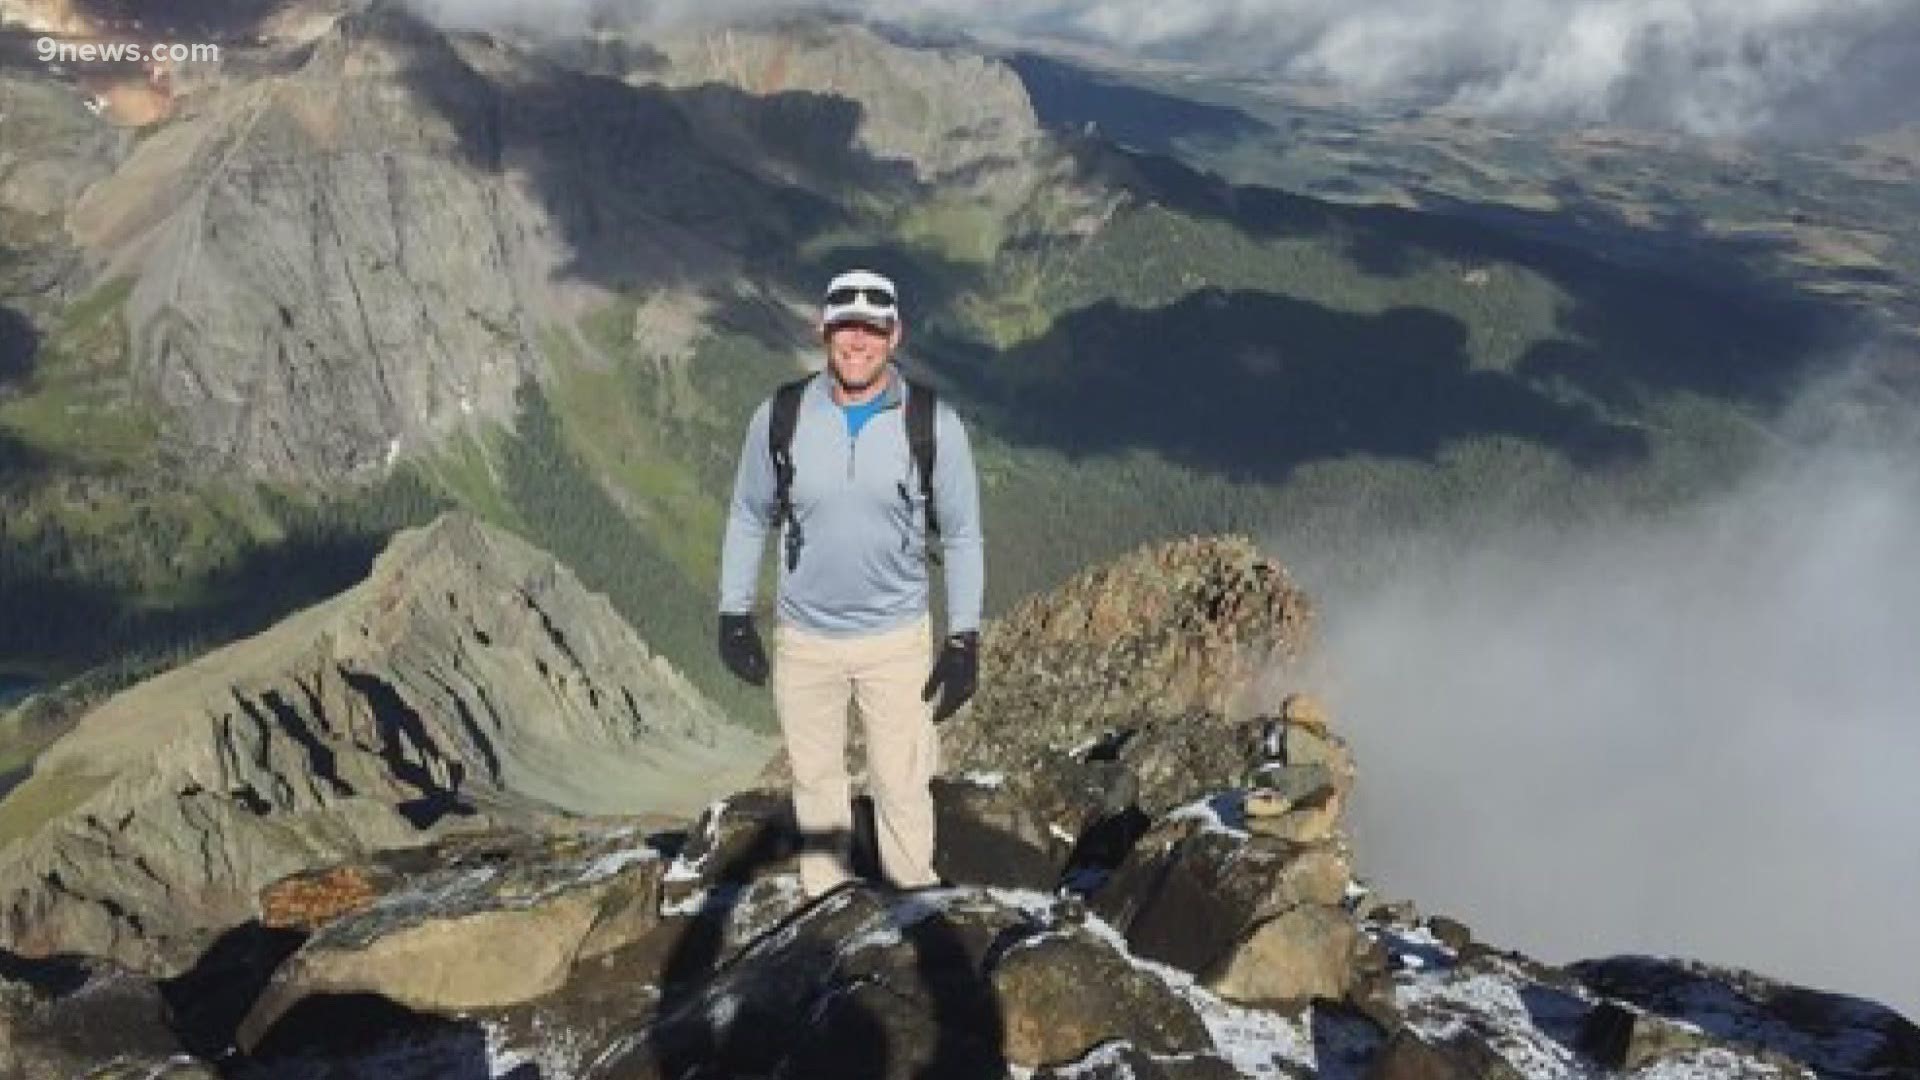 Nearly five years after Dave Cook went missing while hiking Maroon Bells, his family started a campaign to raise money for the team that searched for him.